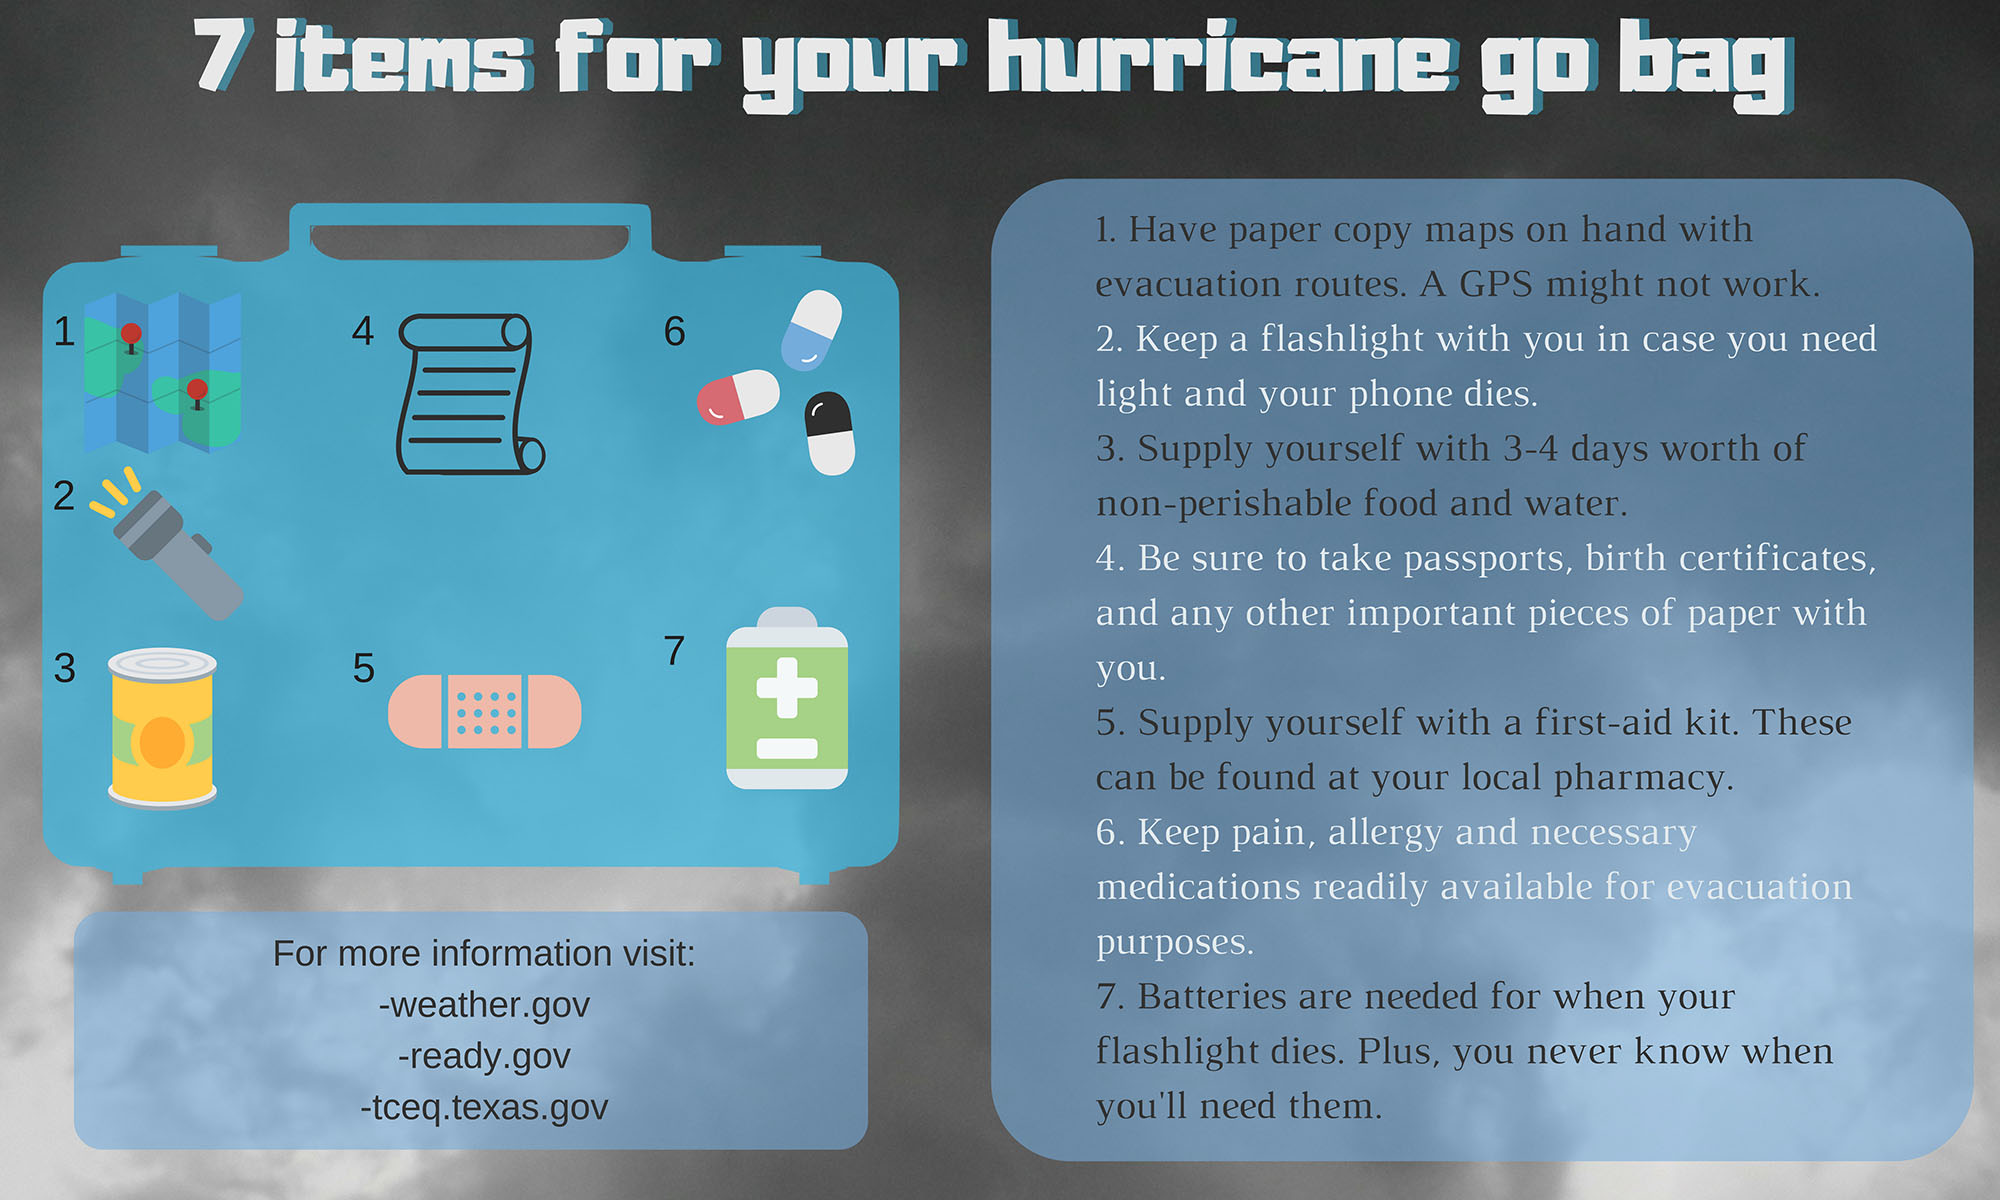 An infographic depicting elements of a hurricane go bag. Infographic created by Managing Editor Justin Murphy.